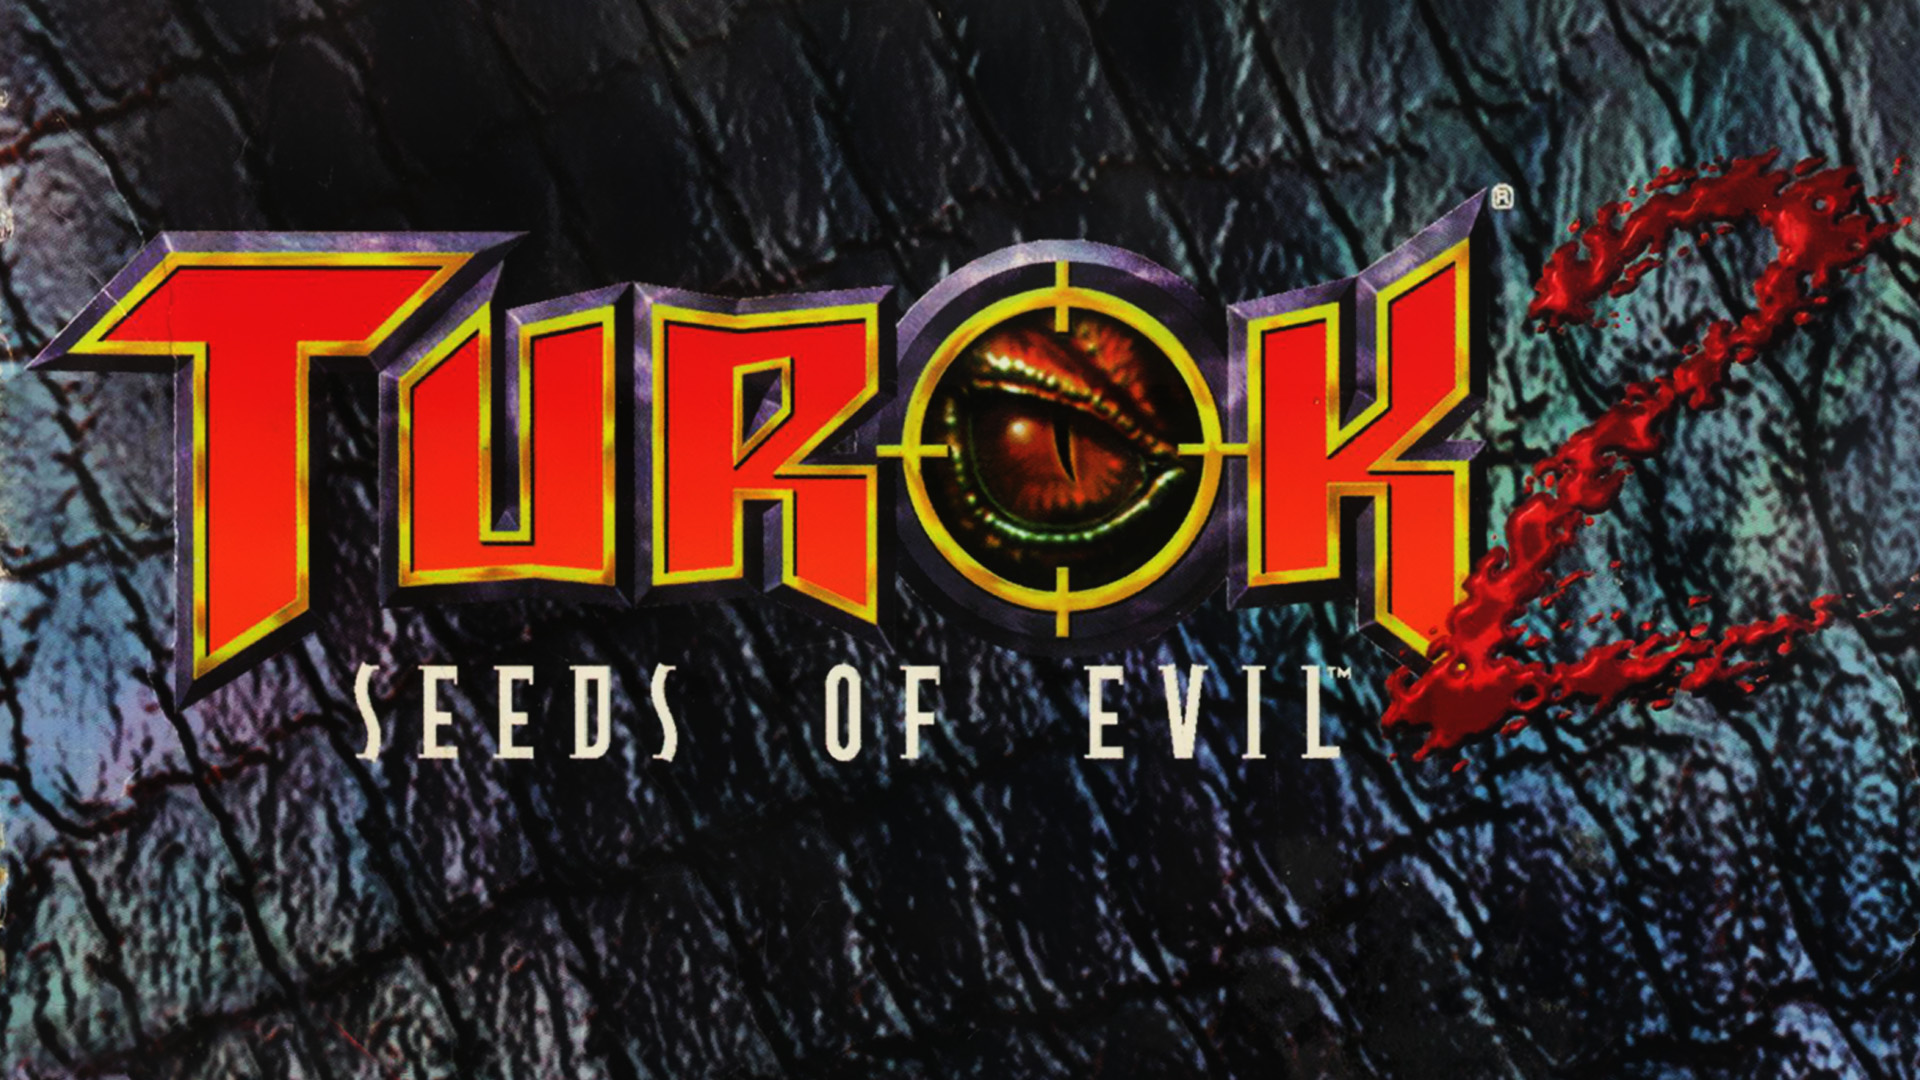 Turok 2: Seeds Of Evil Backgrounds, Compatible - PC, Mobile, Gadgets| 1920x1080 px